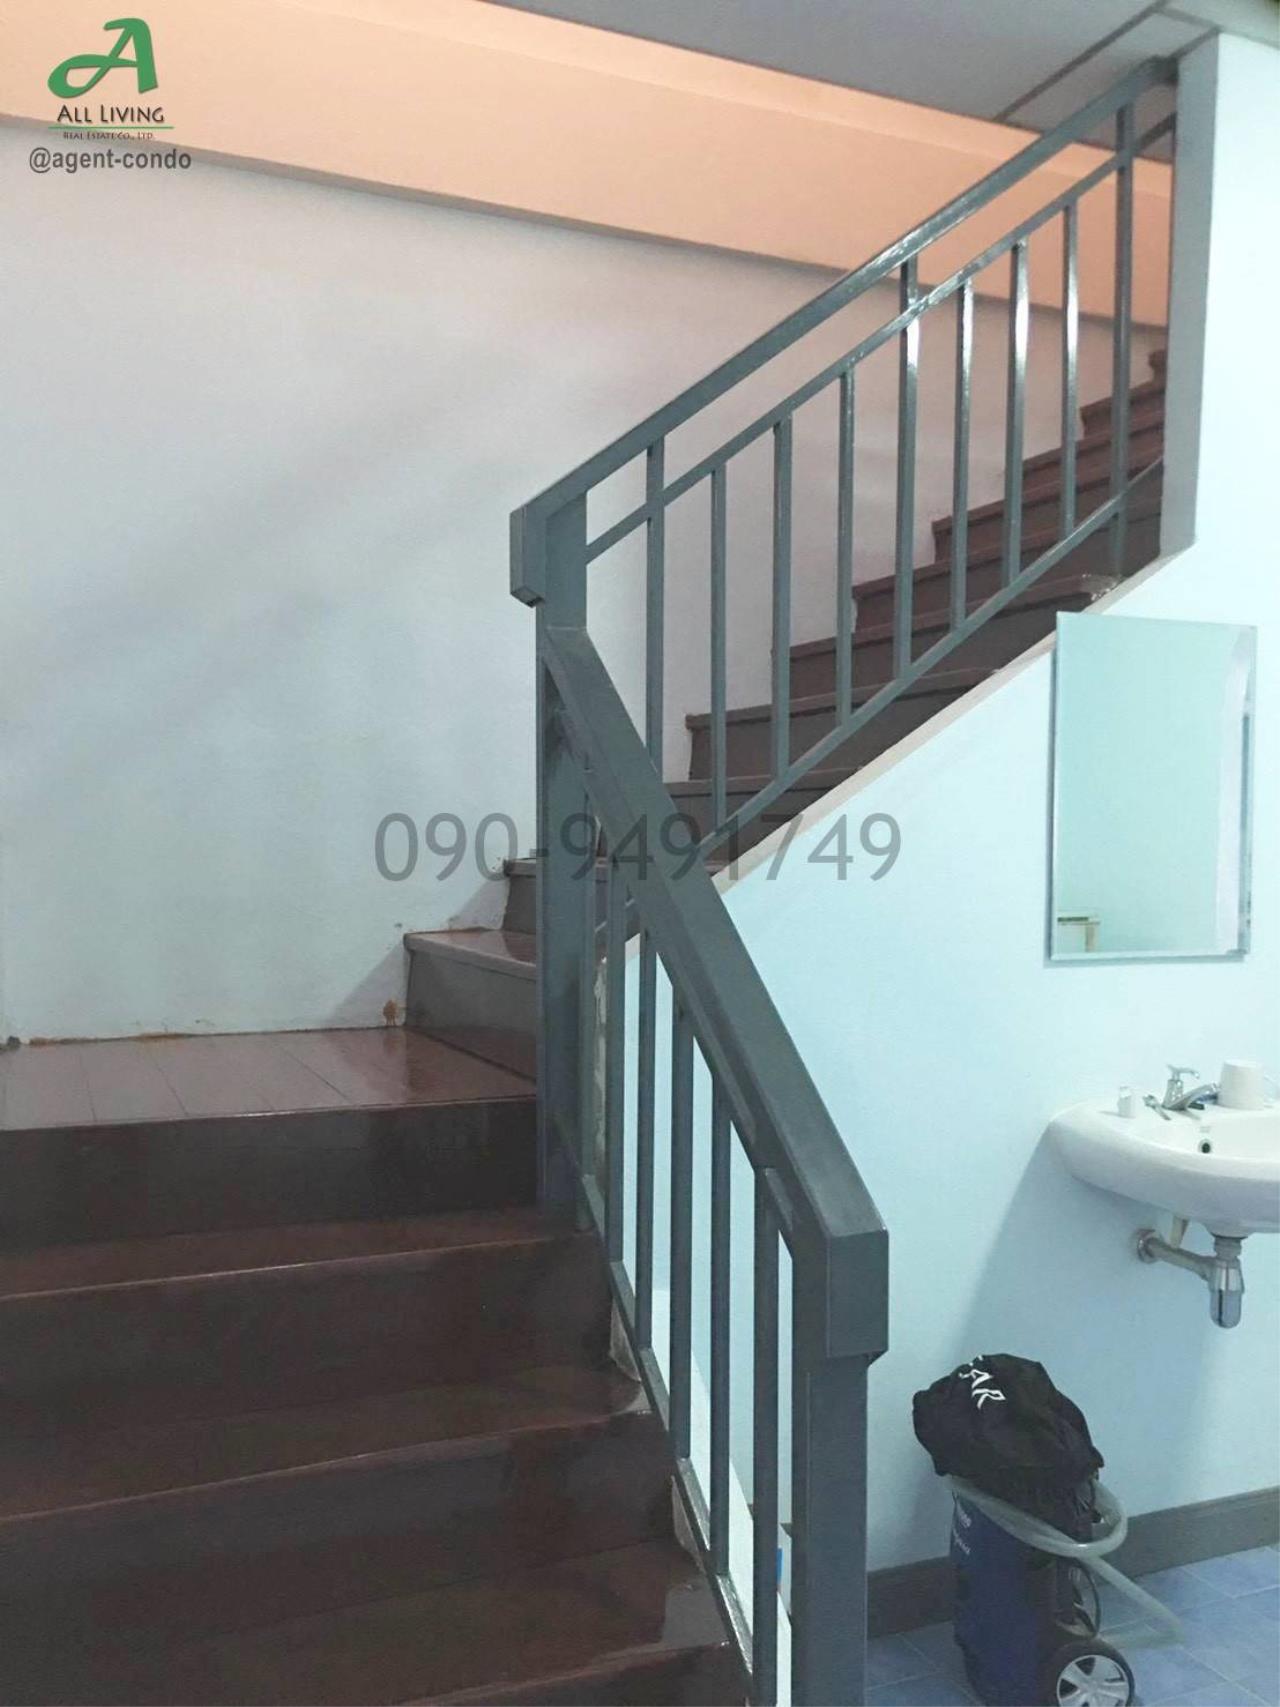 House for rent Soi Ratchada 18 Sutthisan Rd near MRT area 18 sqw 2 2, ภาพที่ 4